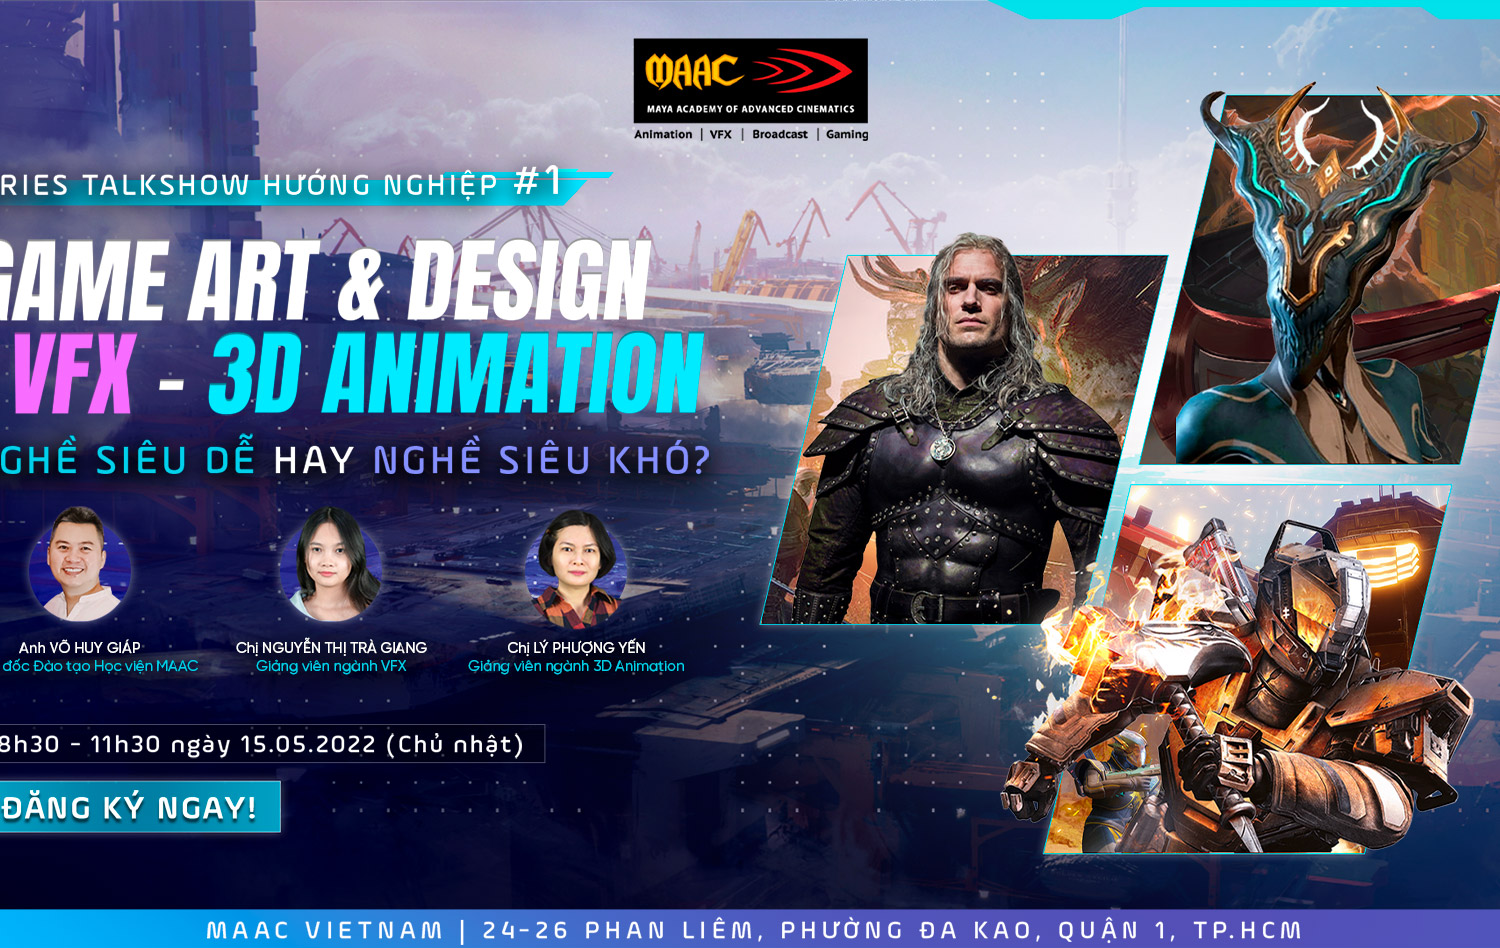 GAME ART & DESIGN - 3D ANIMATION - VISUAL EFFECTS: NGHỀ SIÊU DỄ hay NGHỀ  SIÊU KHÓ? - Vfx-Animation